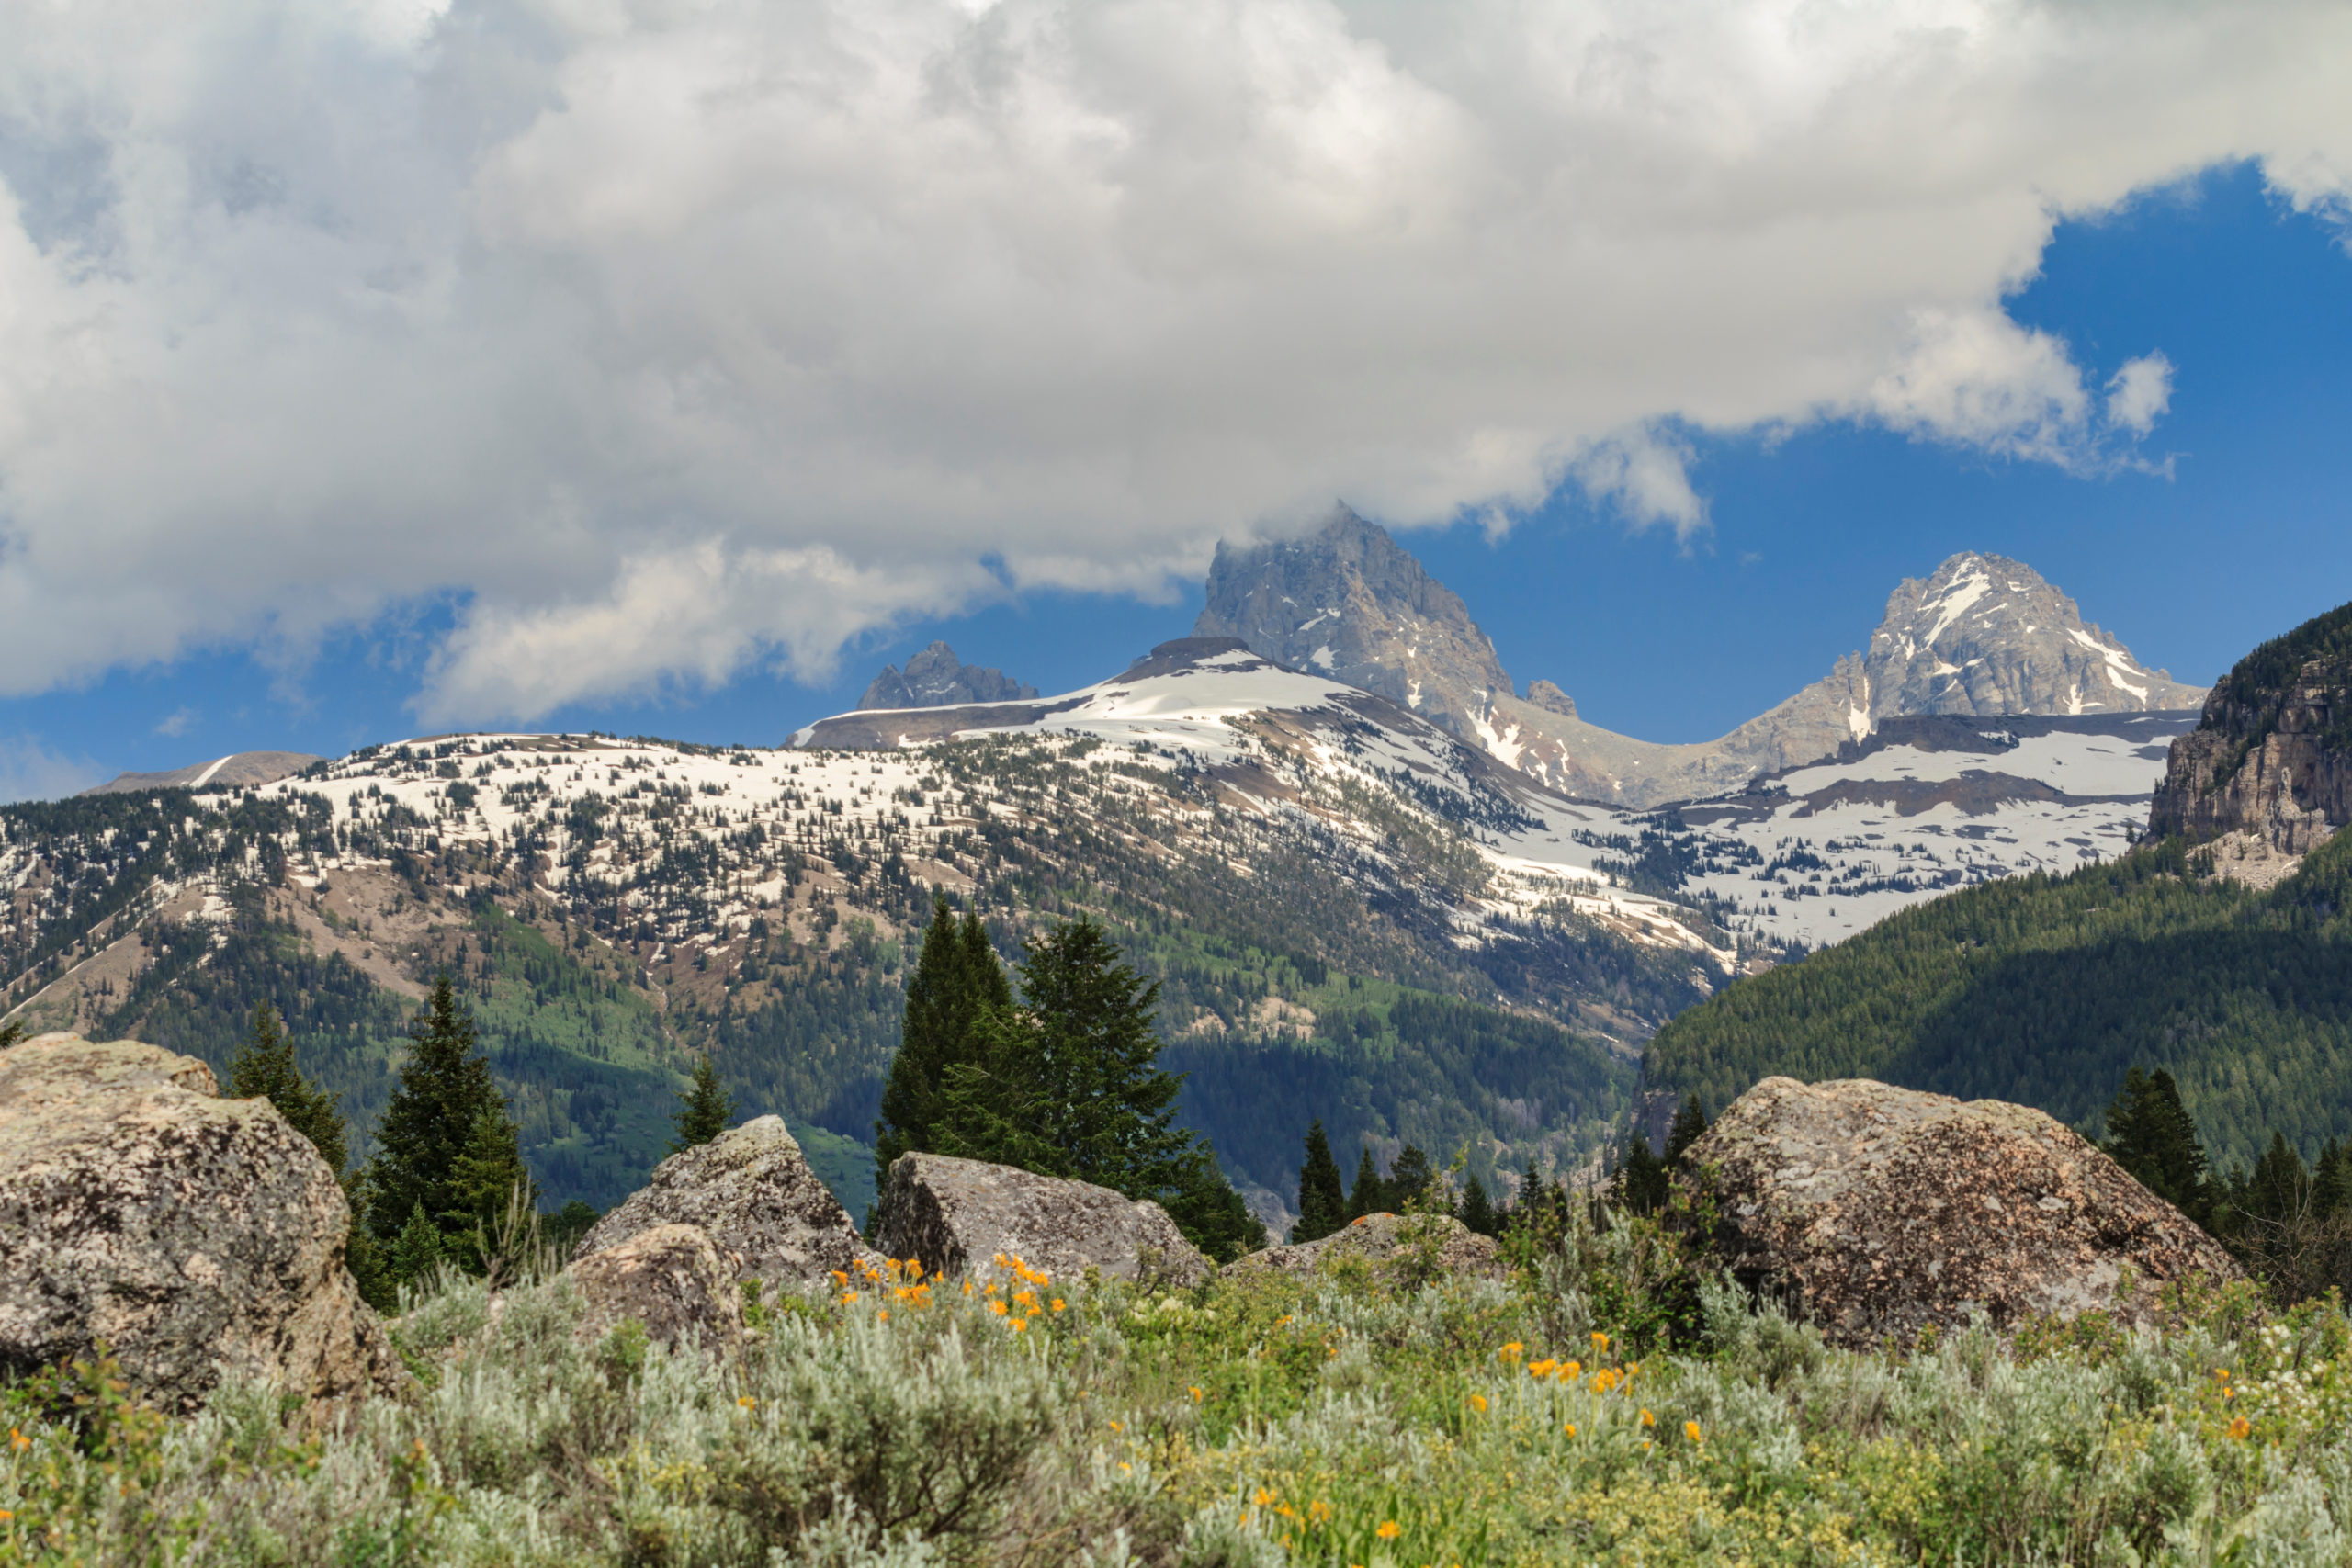 Discover Teton Valley, Idaho – The Quiet Side of the Tetons